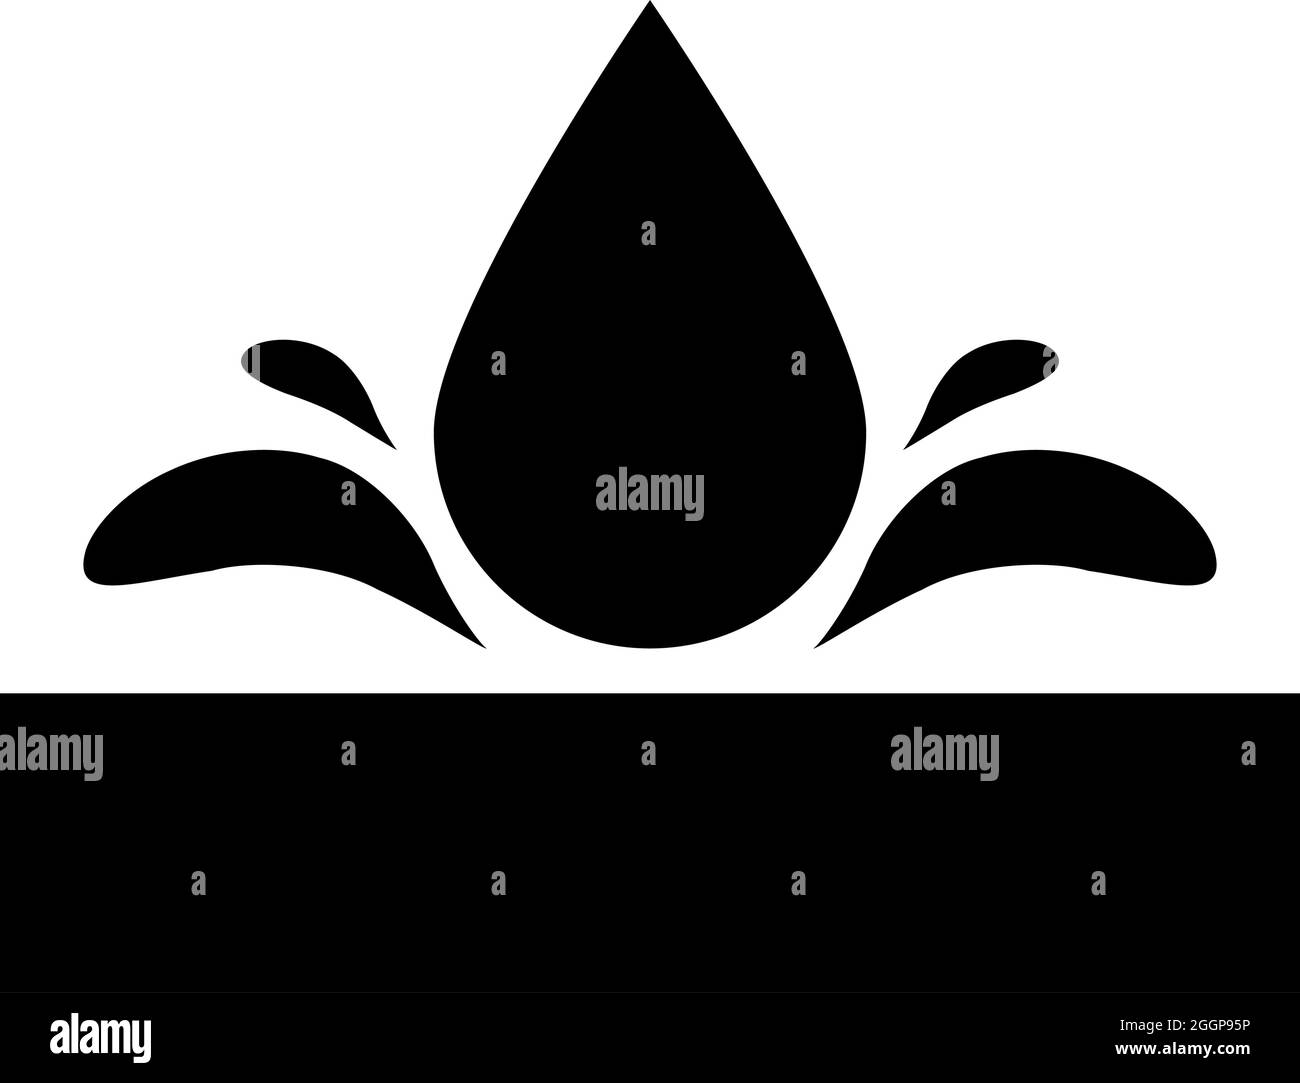 Waterproof Water resistant surface Drop pushing out foundation impermeable fabric wet protection Hydrophobic material icon black color vector Stock Vector